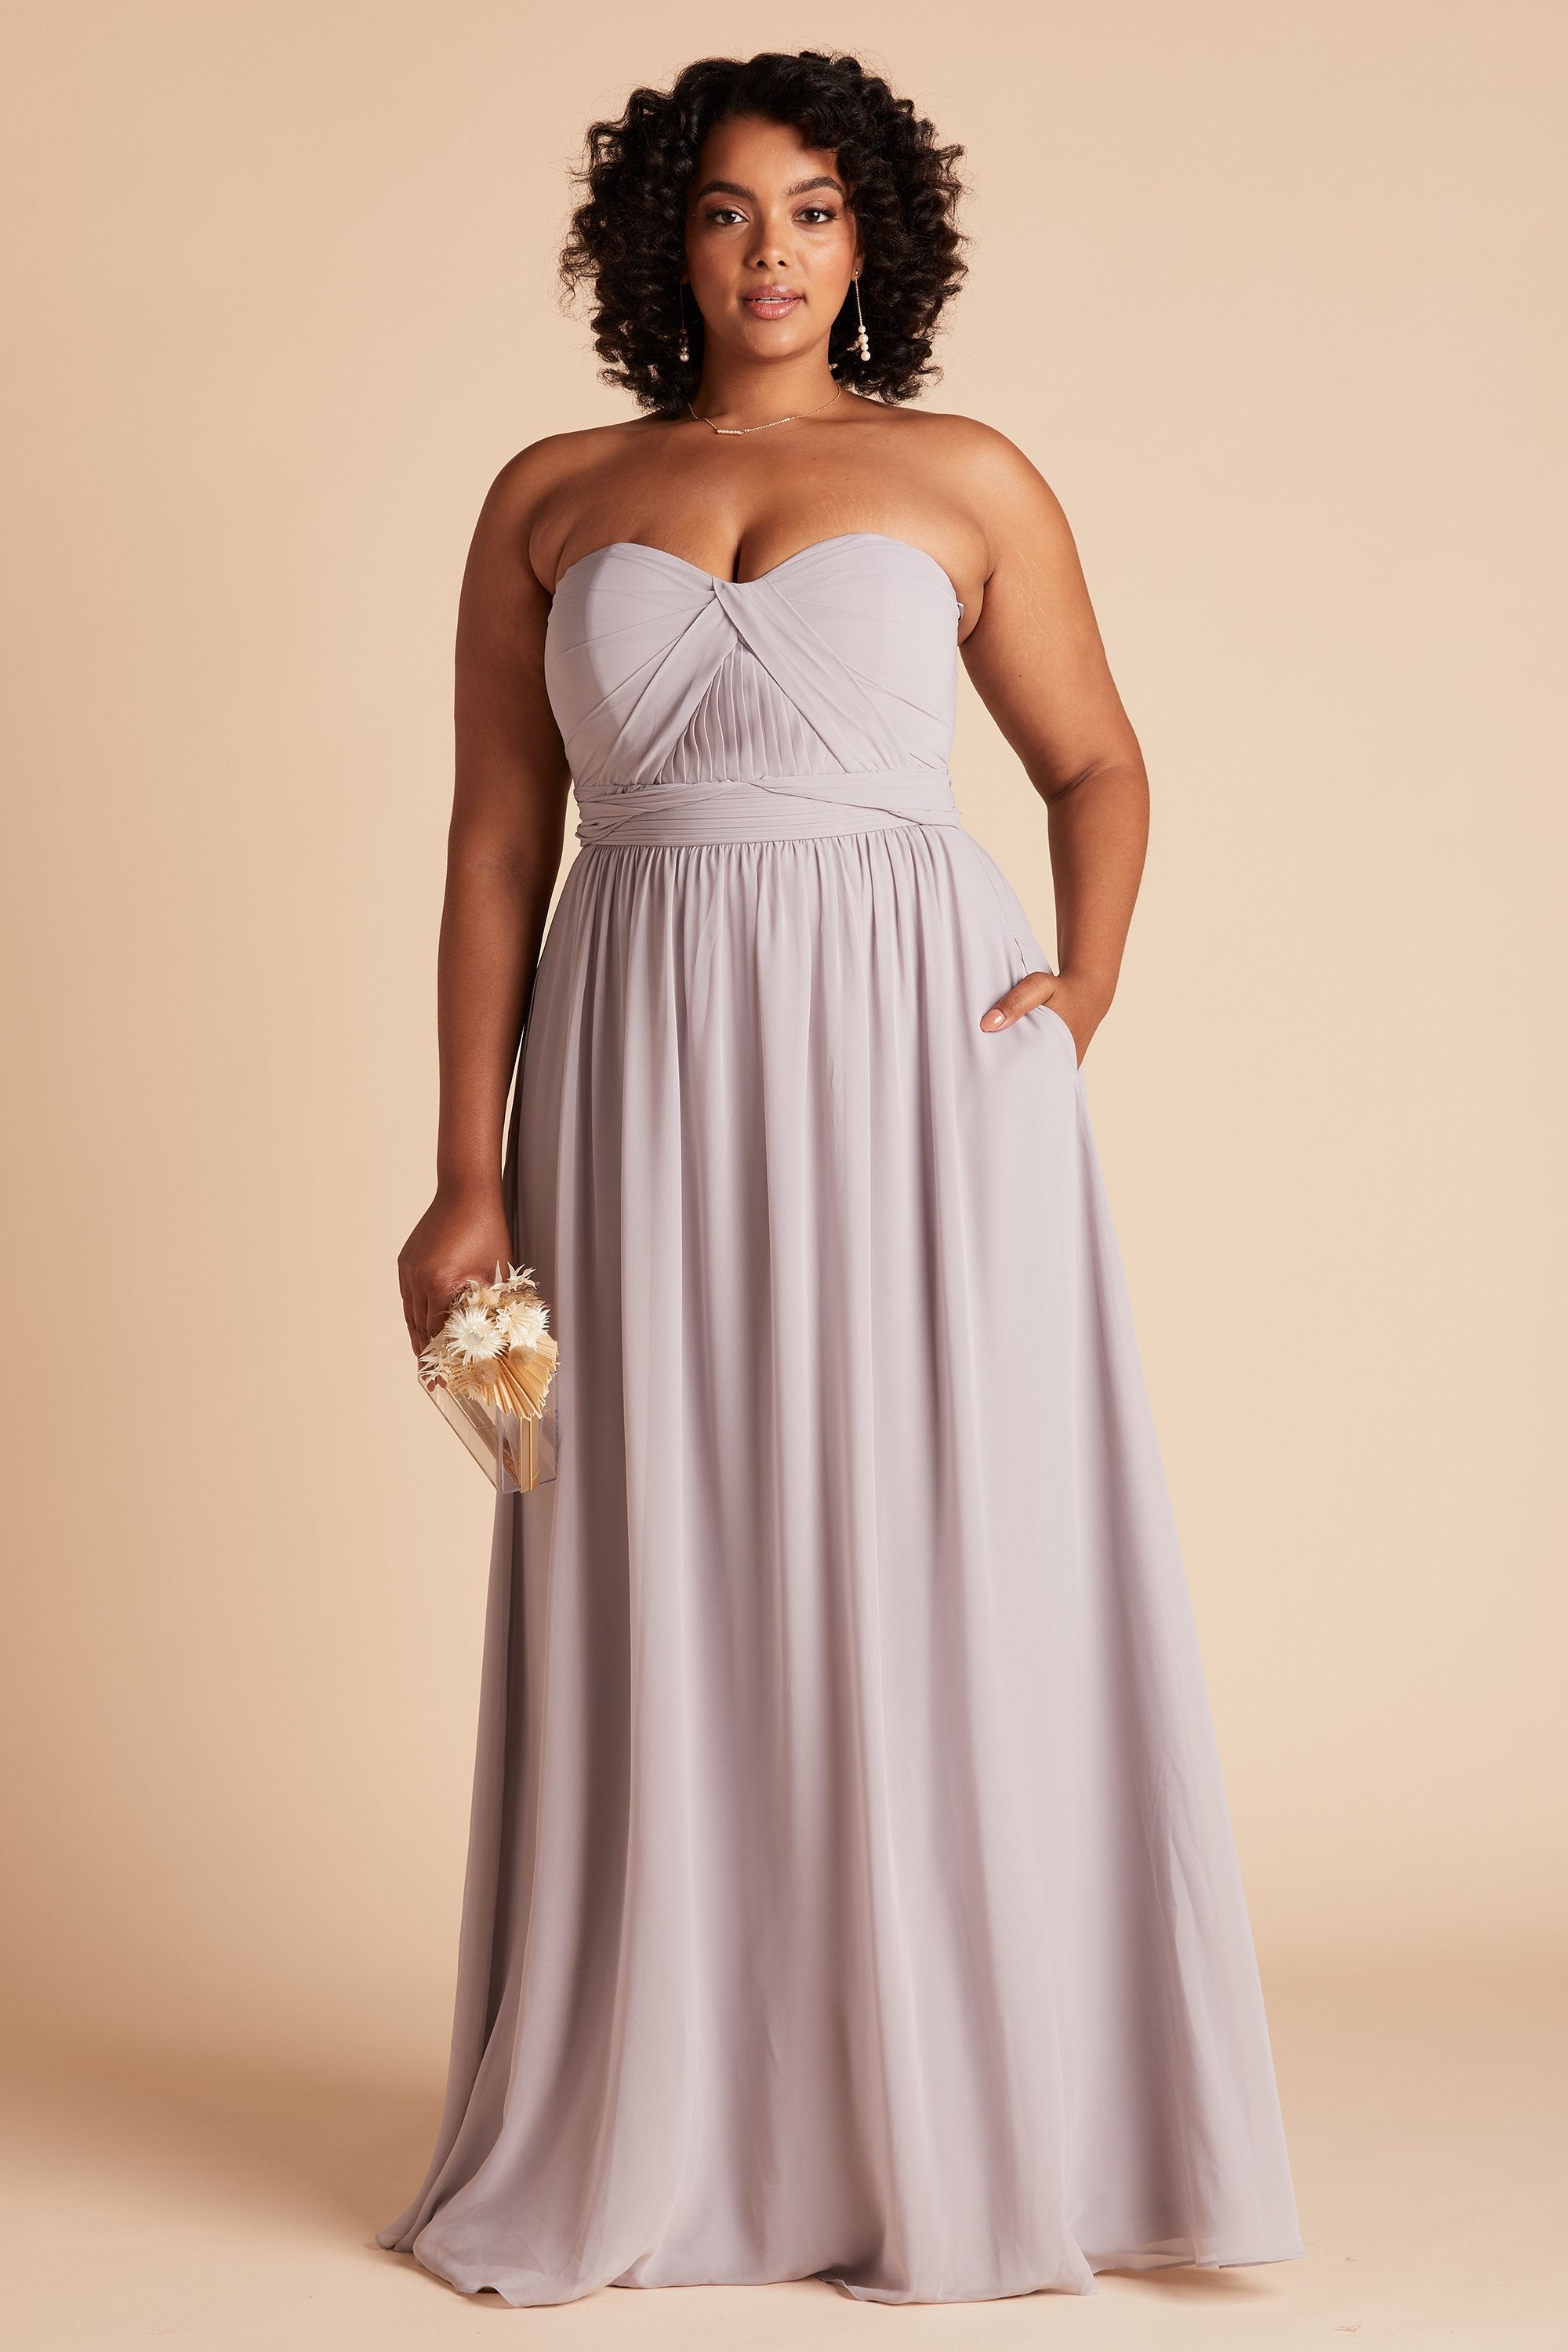 Grace convertible plus size bridesmaid dress in lilac purple chiffon by Birdy Grey, front view